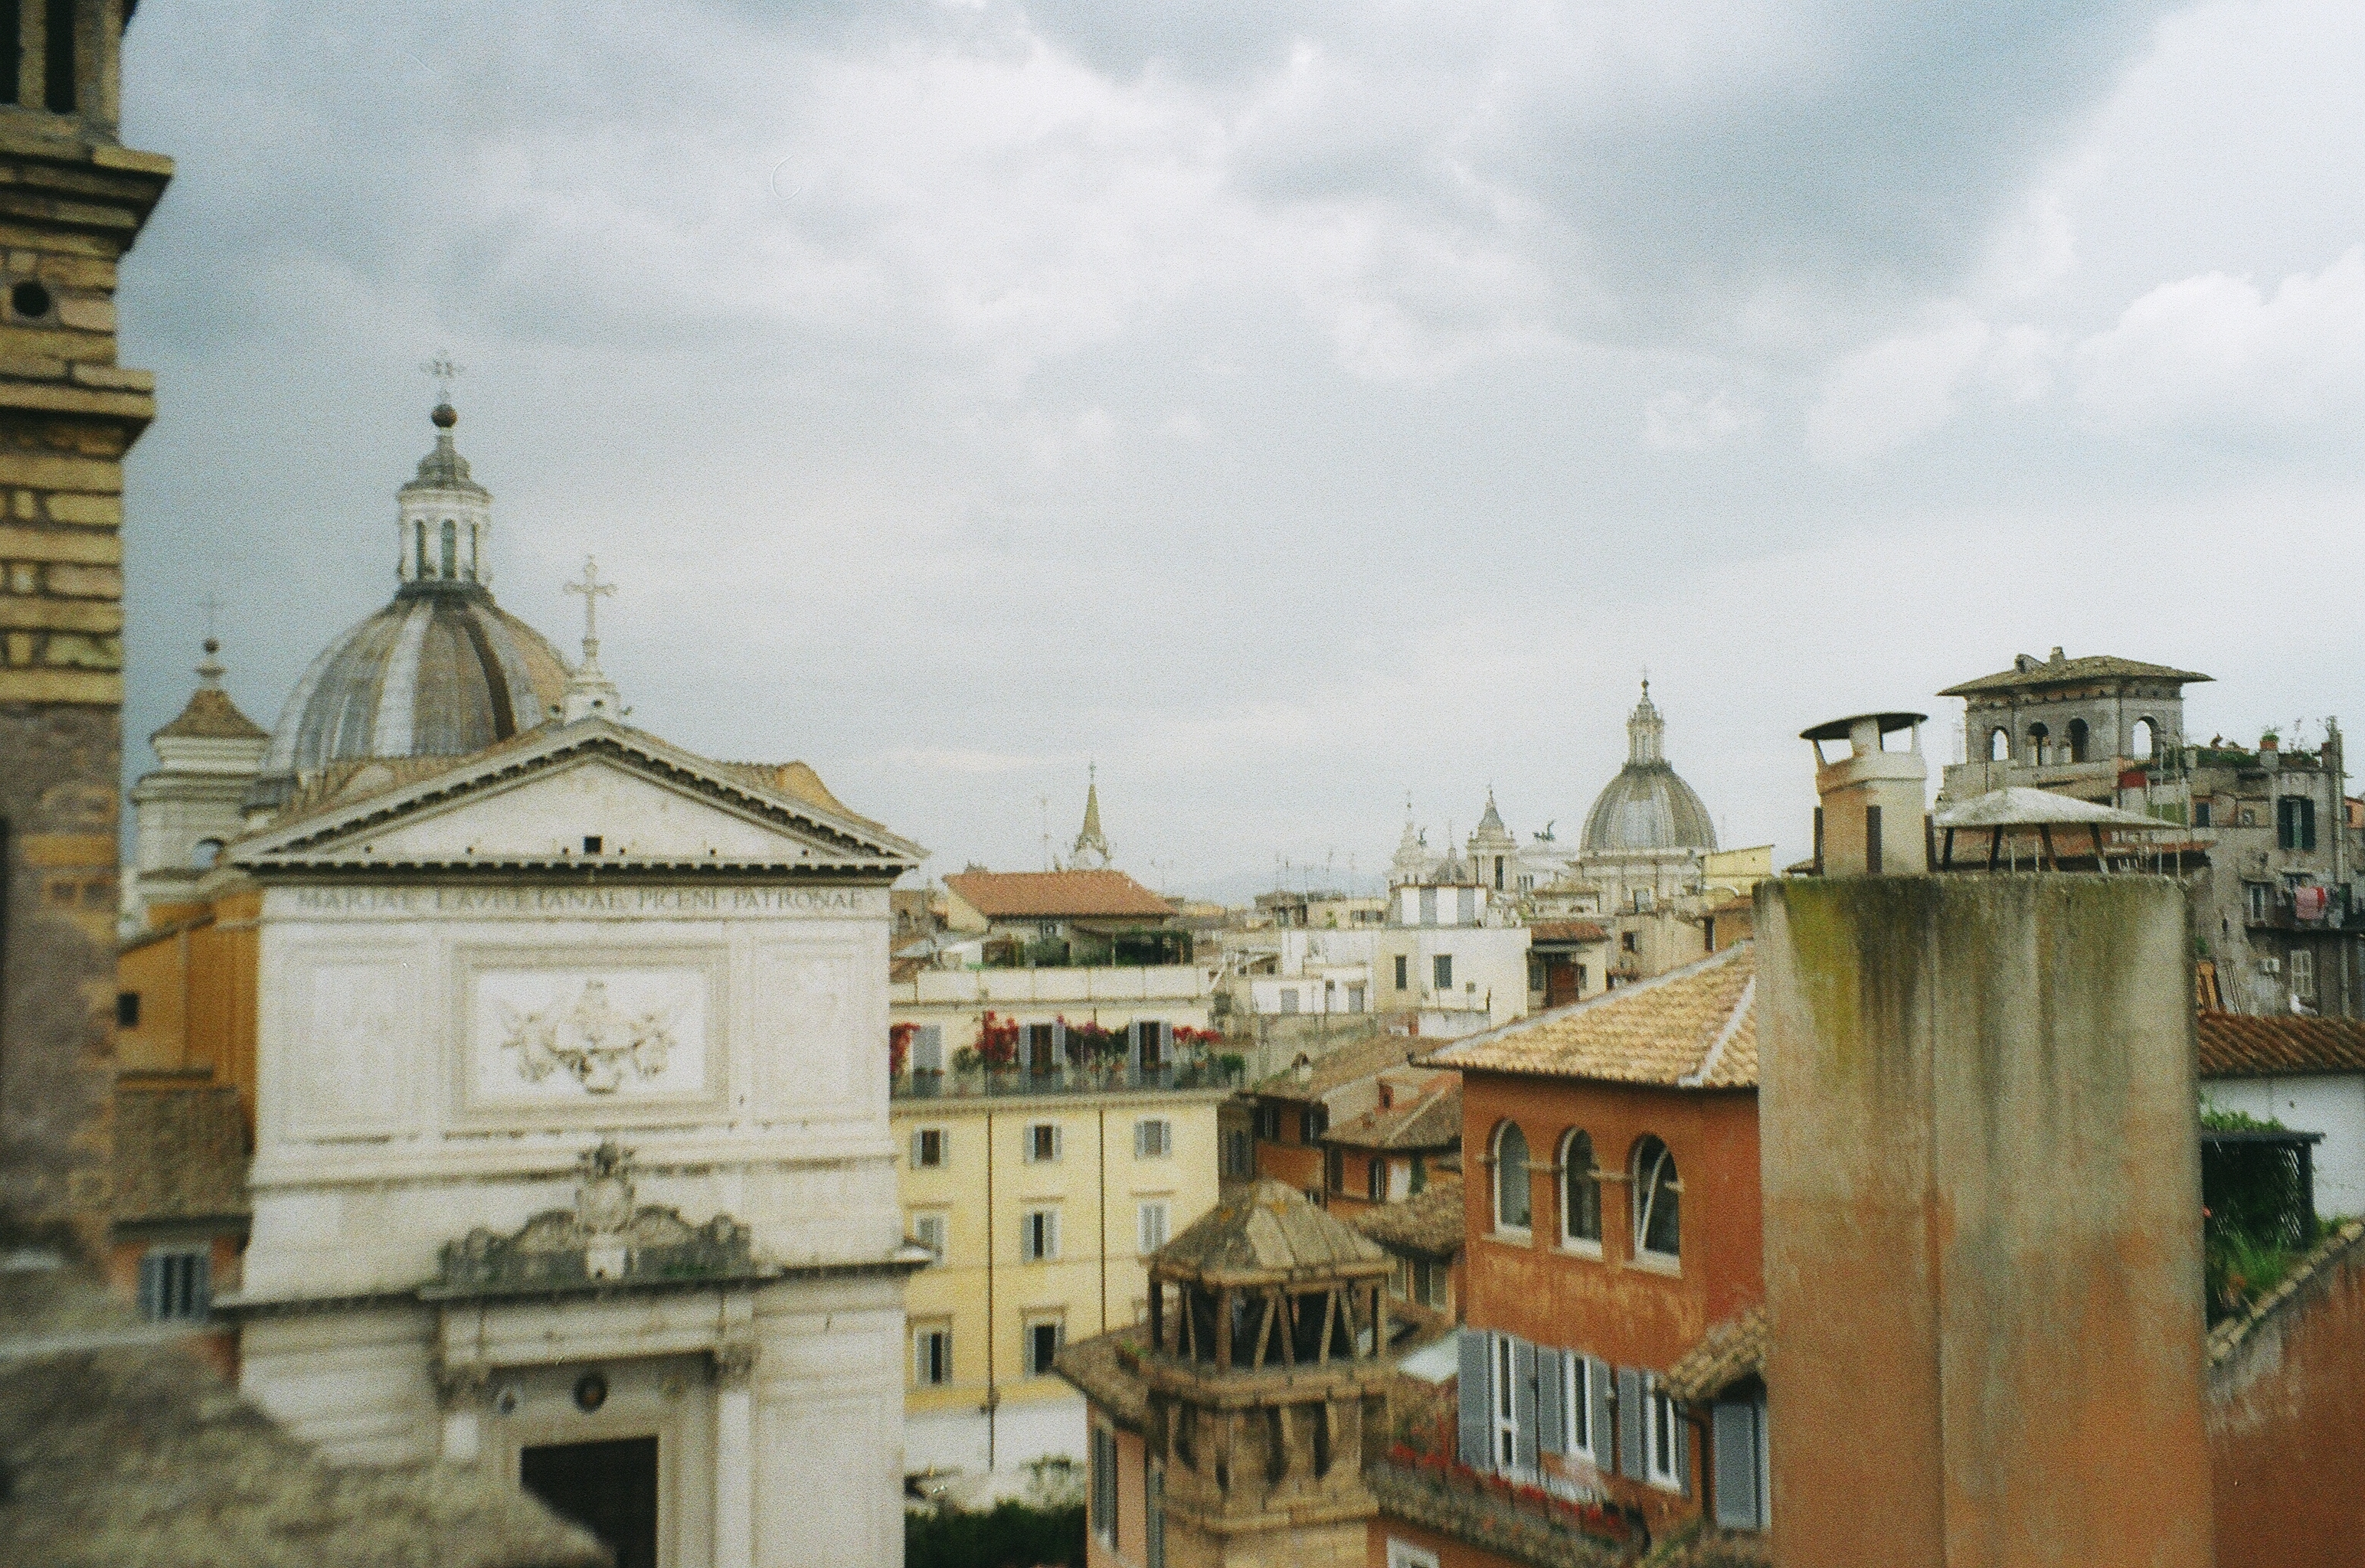 This image depicts the many different architecture styles of the Rome Rooftops in Italy with many Domes and angled tiles.